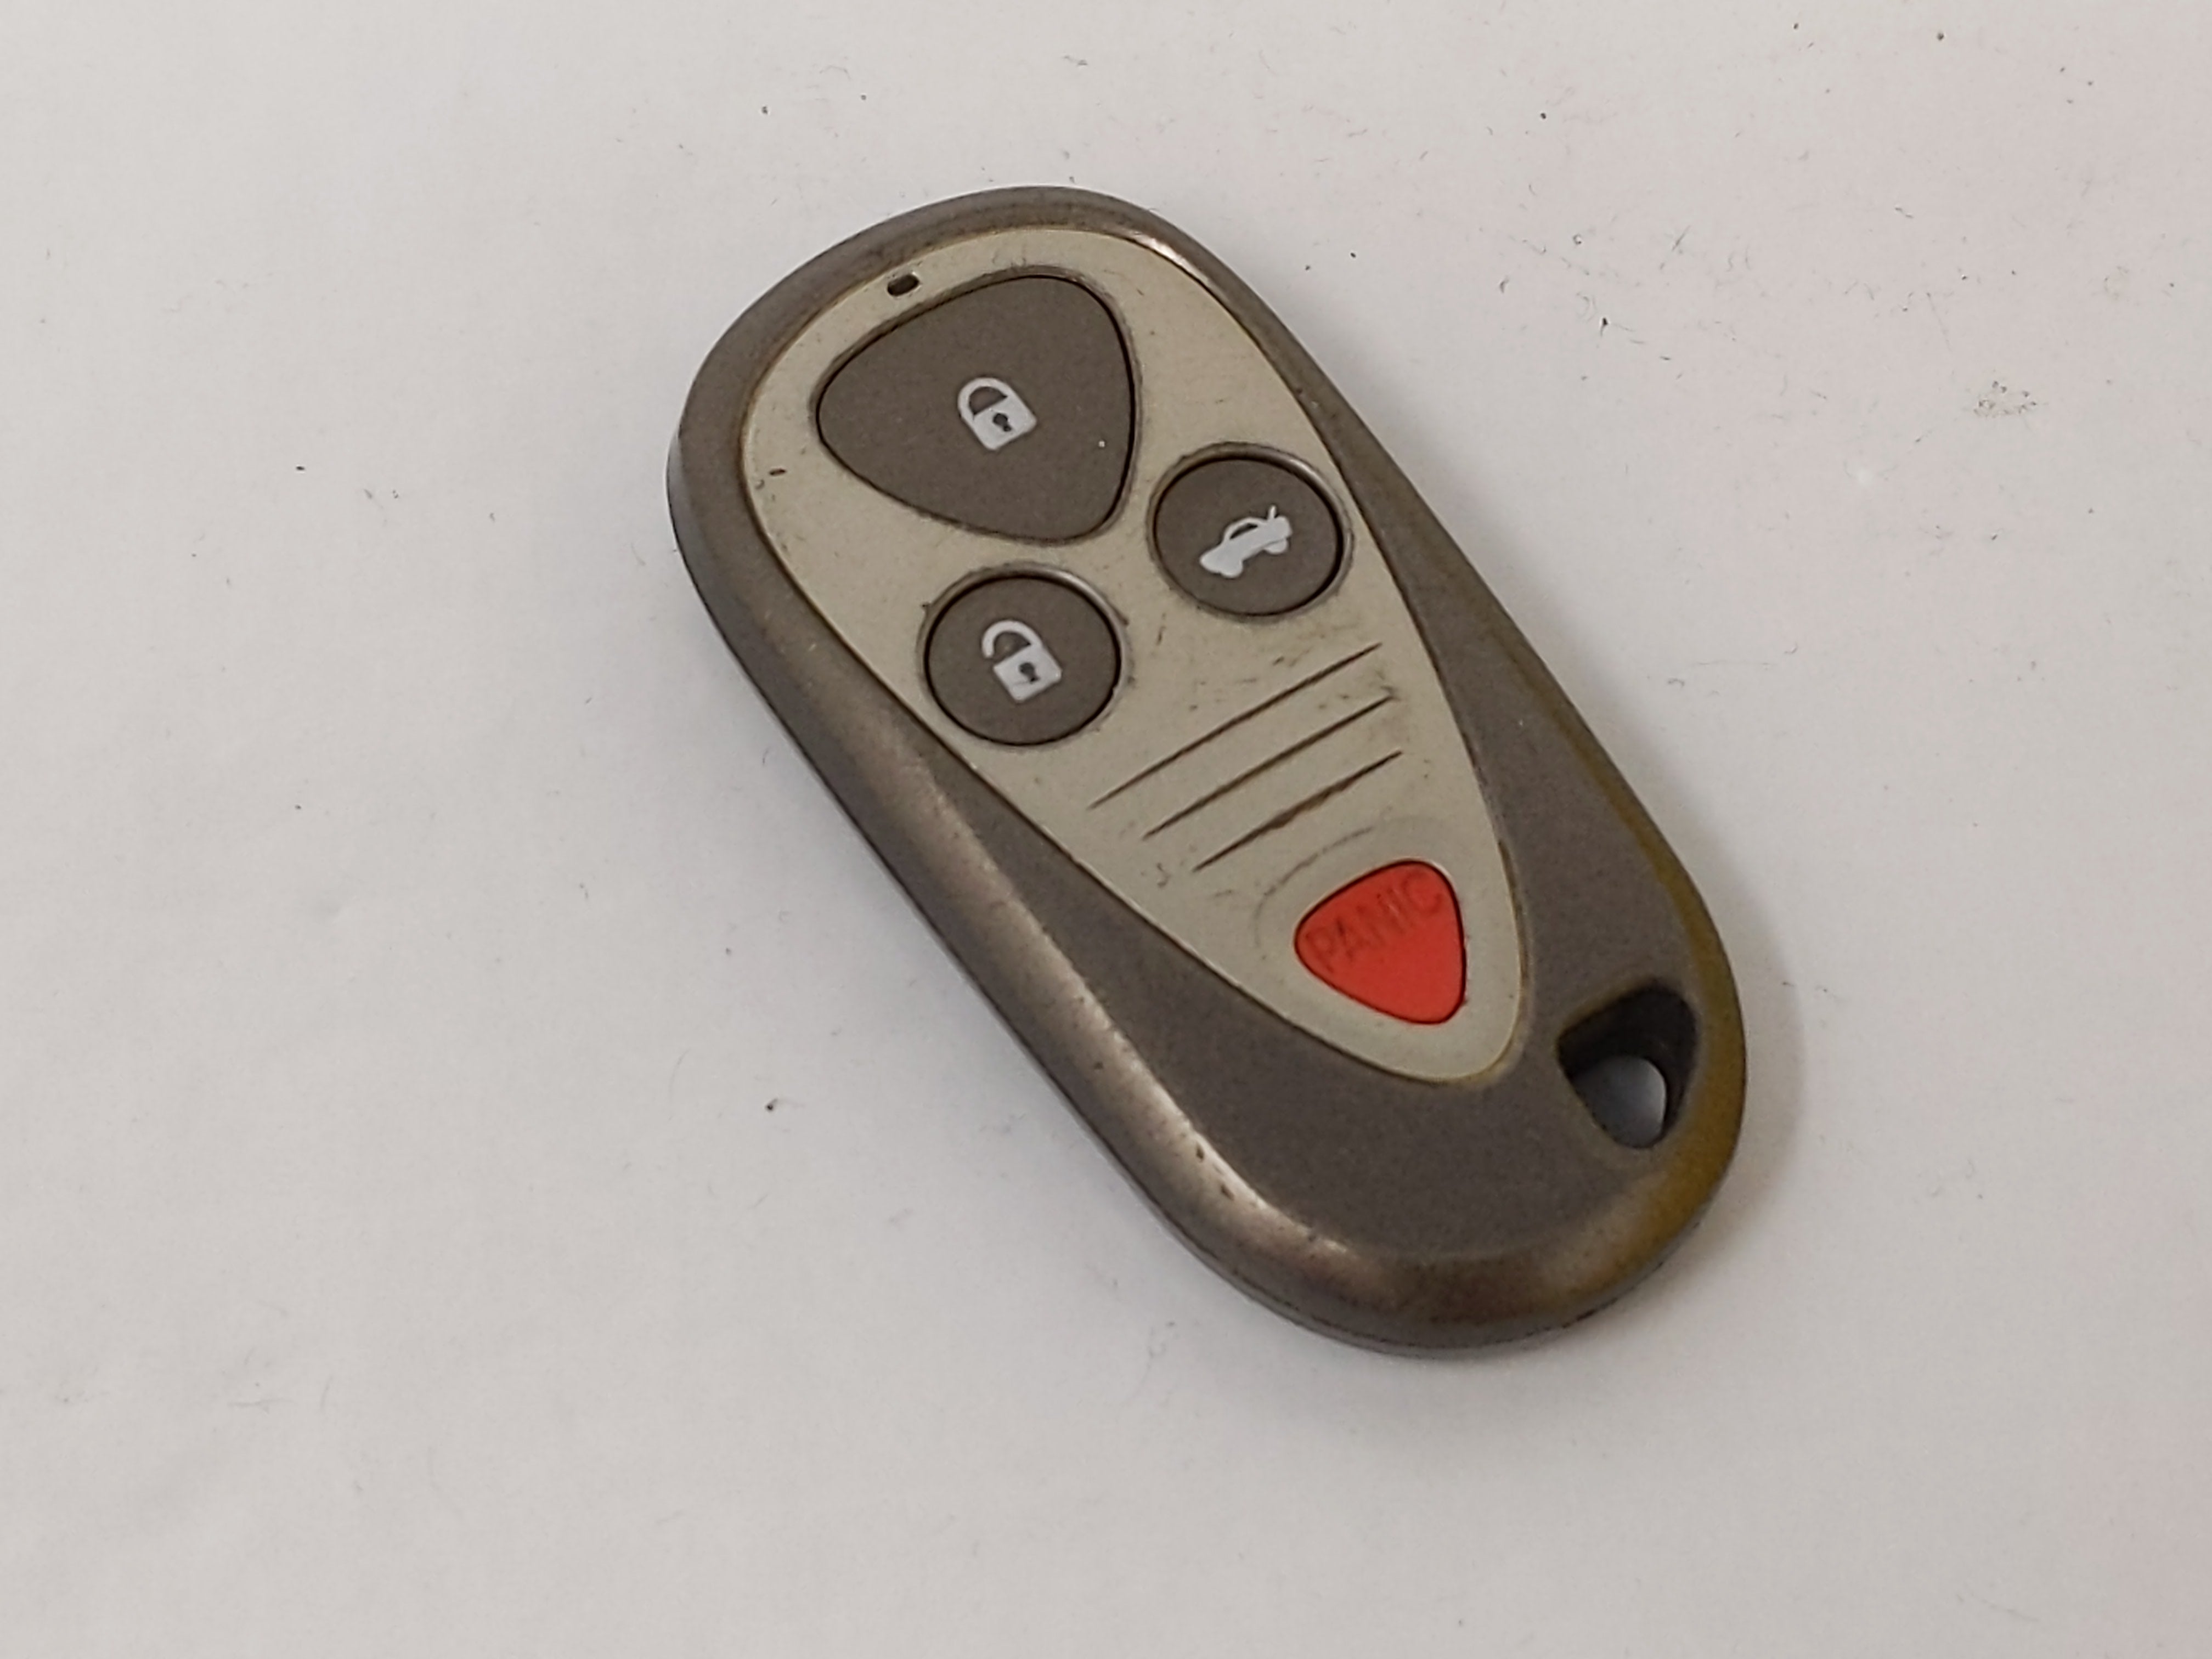 2004-2009 Acura Tsx Keyless Entry Remote Oucg8d-387h-A G8d-387h-A Driver2 - Oemusedautoparts1.com